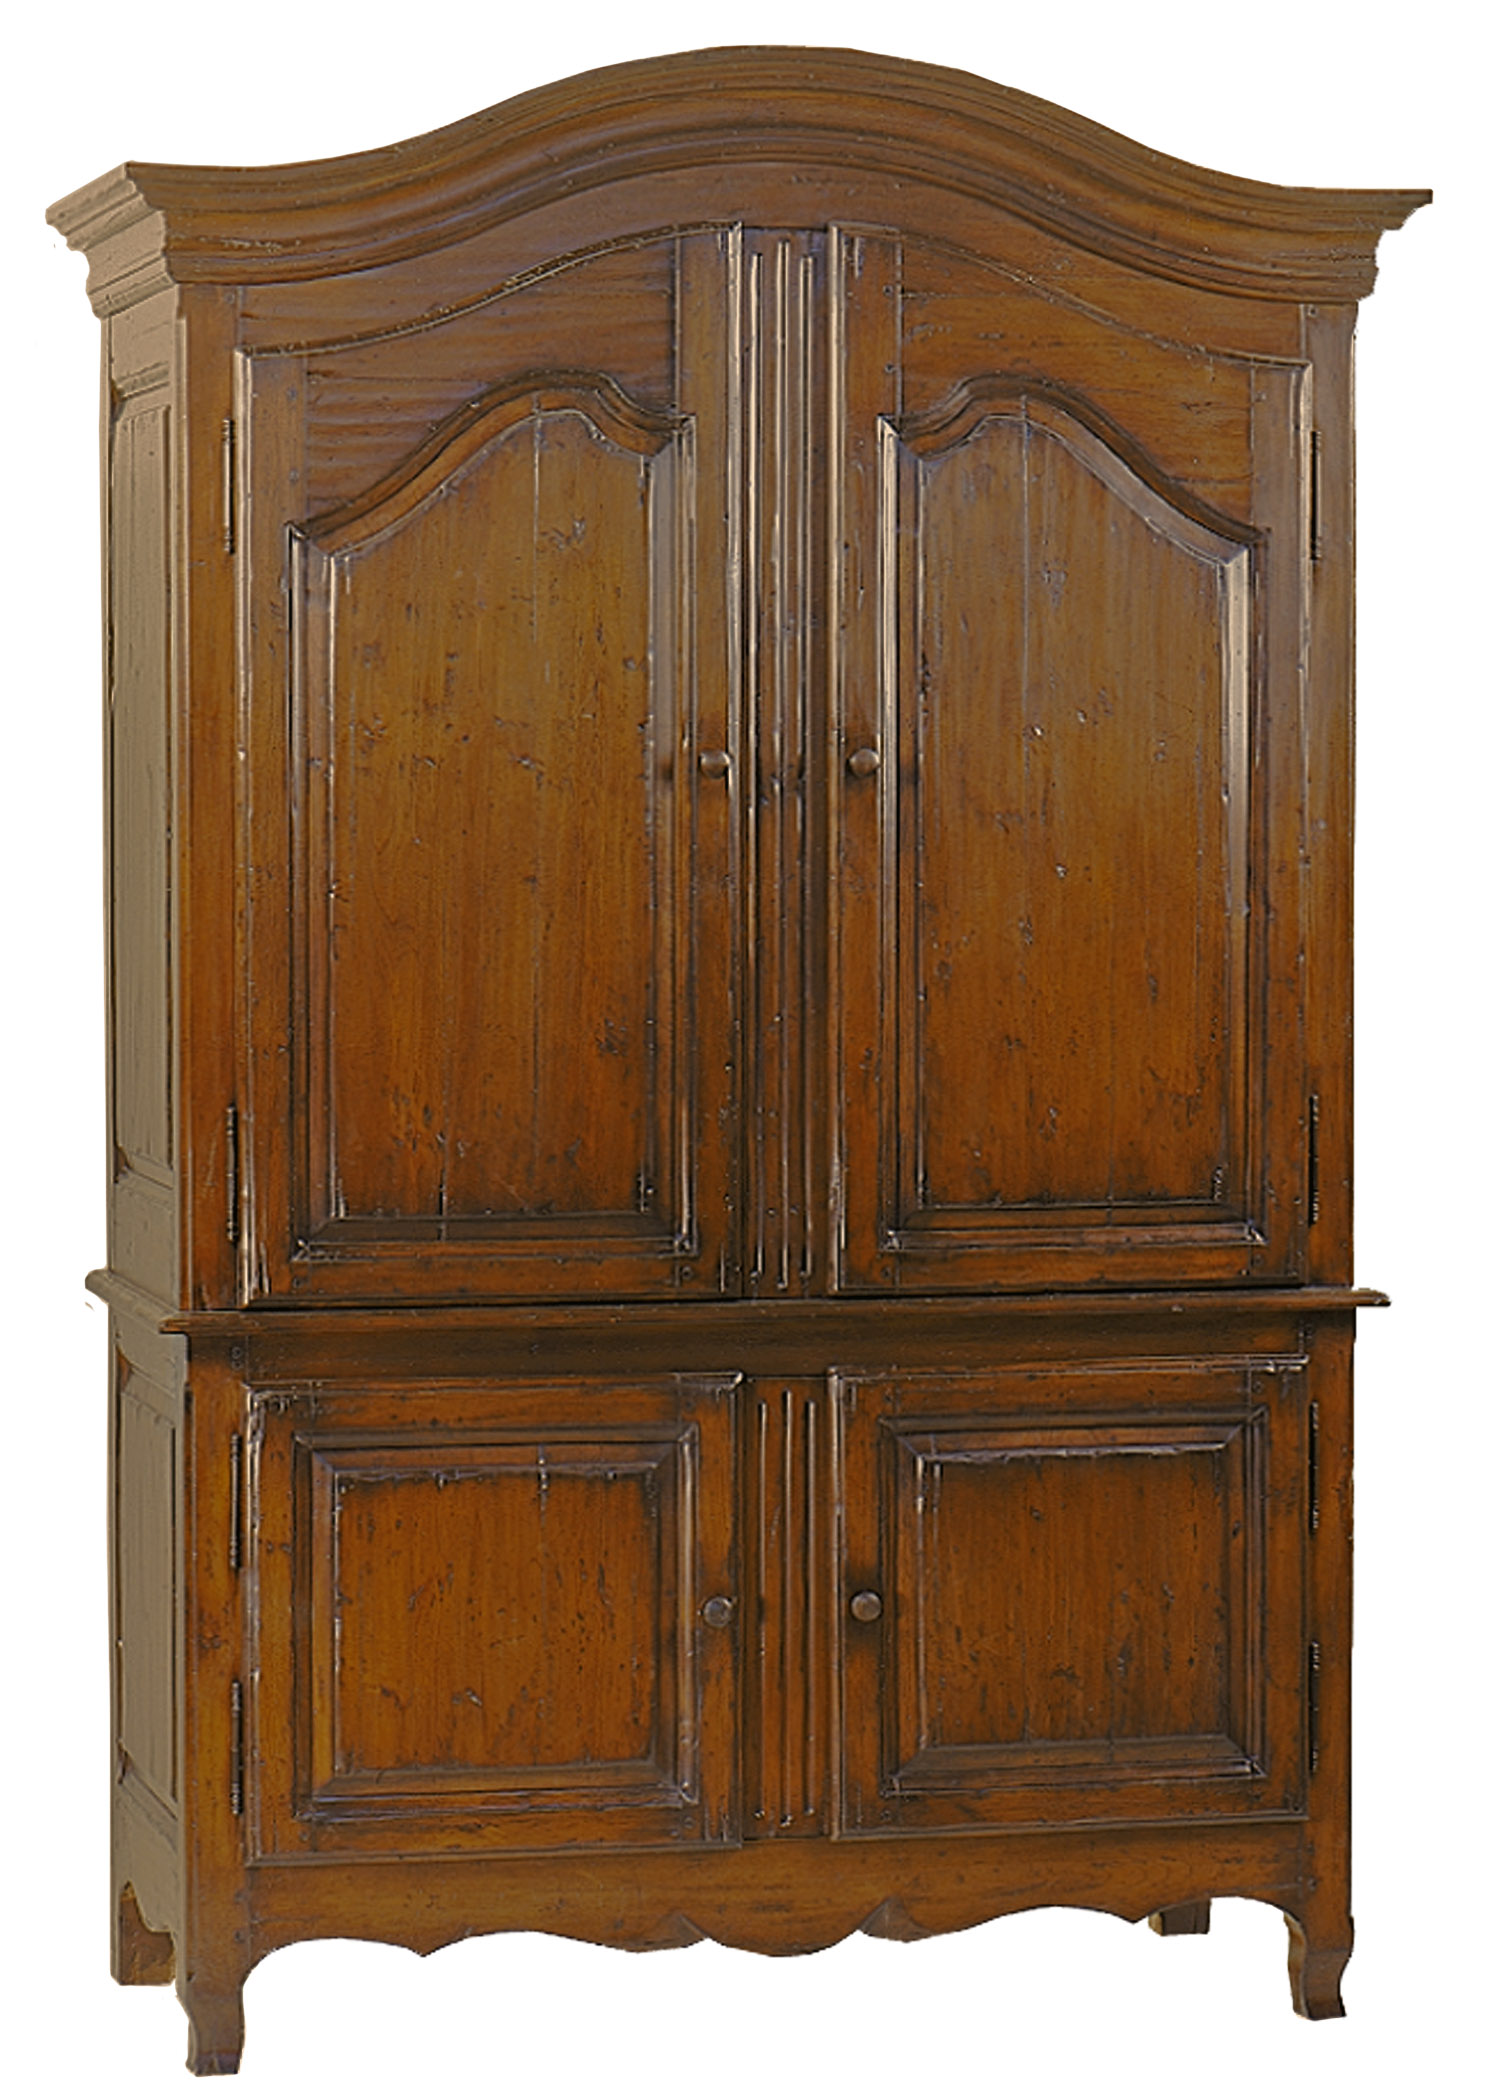 Calloway traditional painted or stained armoire cabinet by Woodland furniture